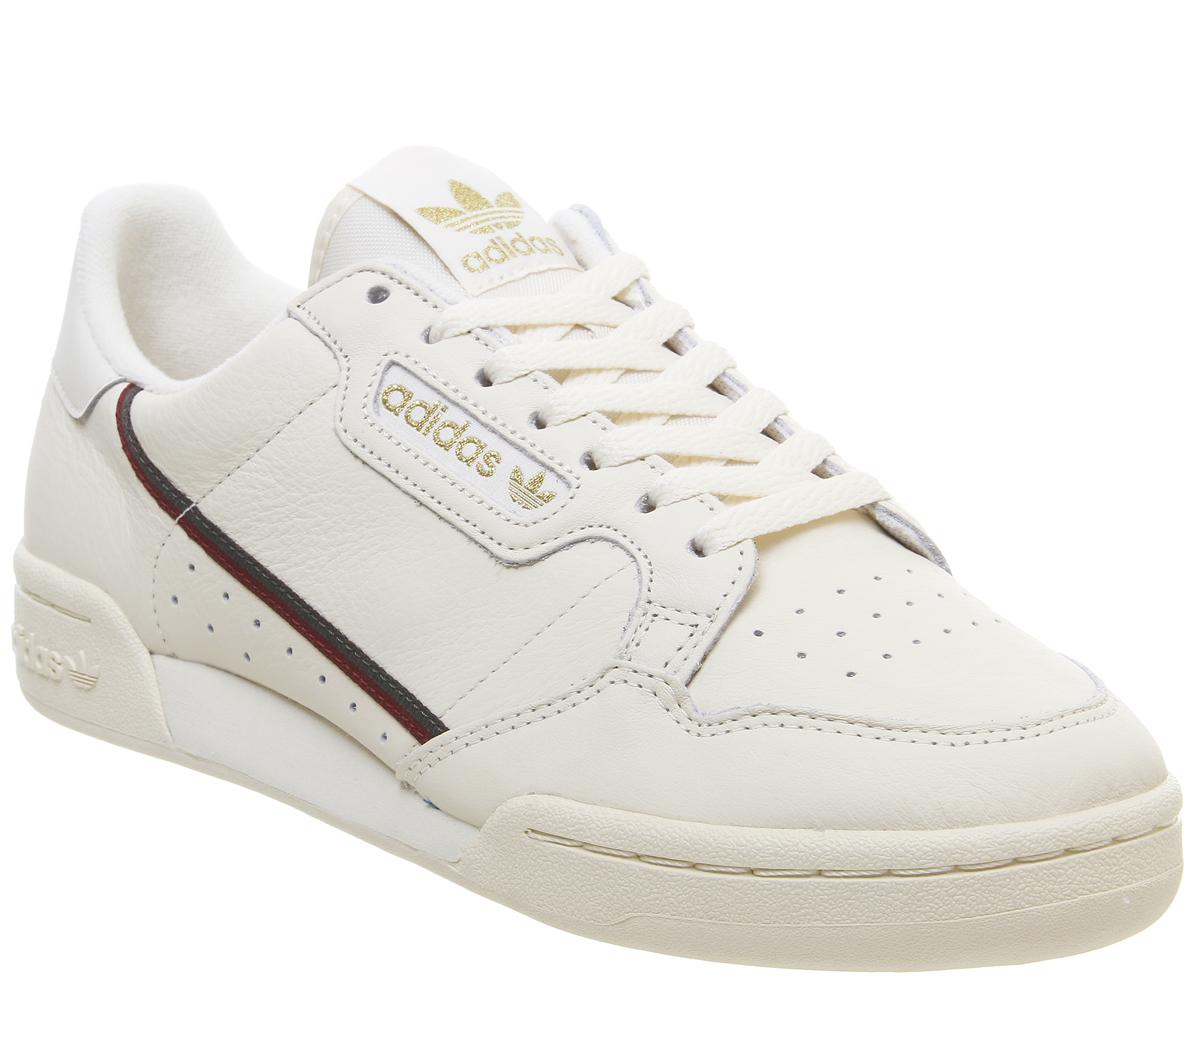 adidas continental black and gold Promotions